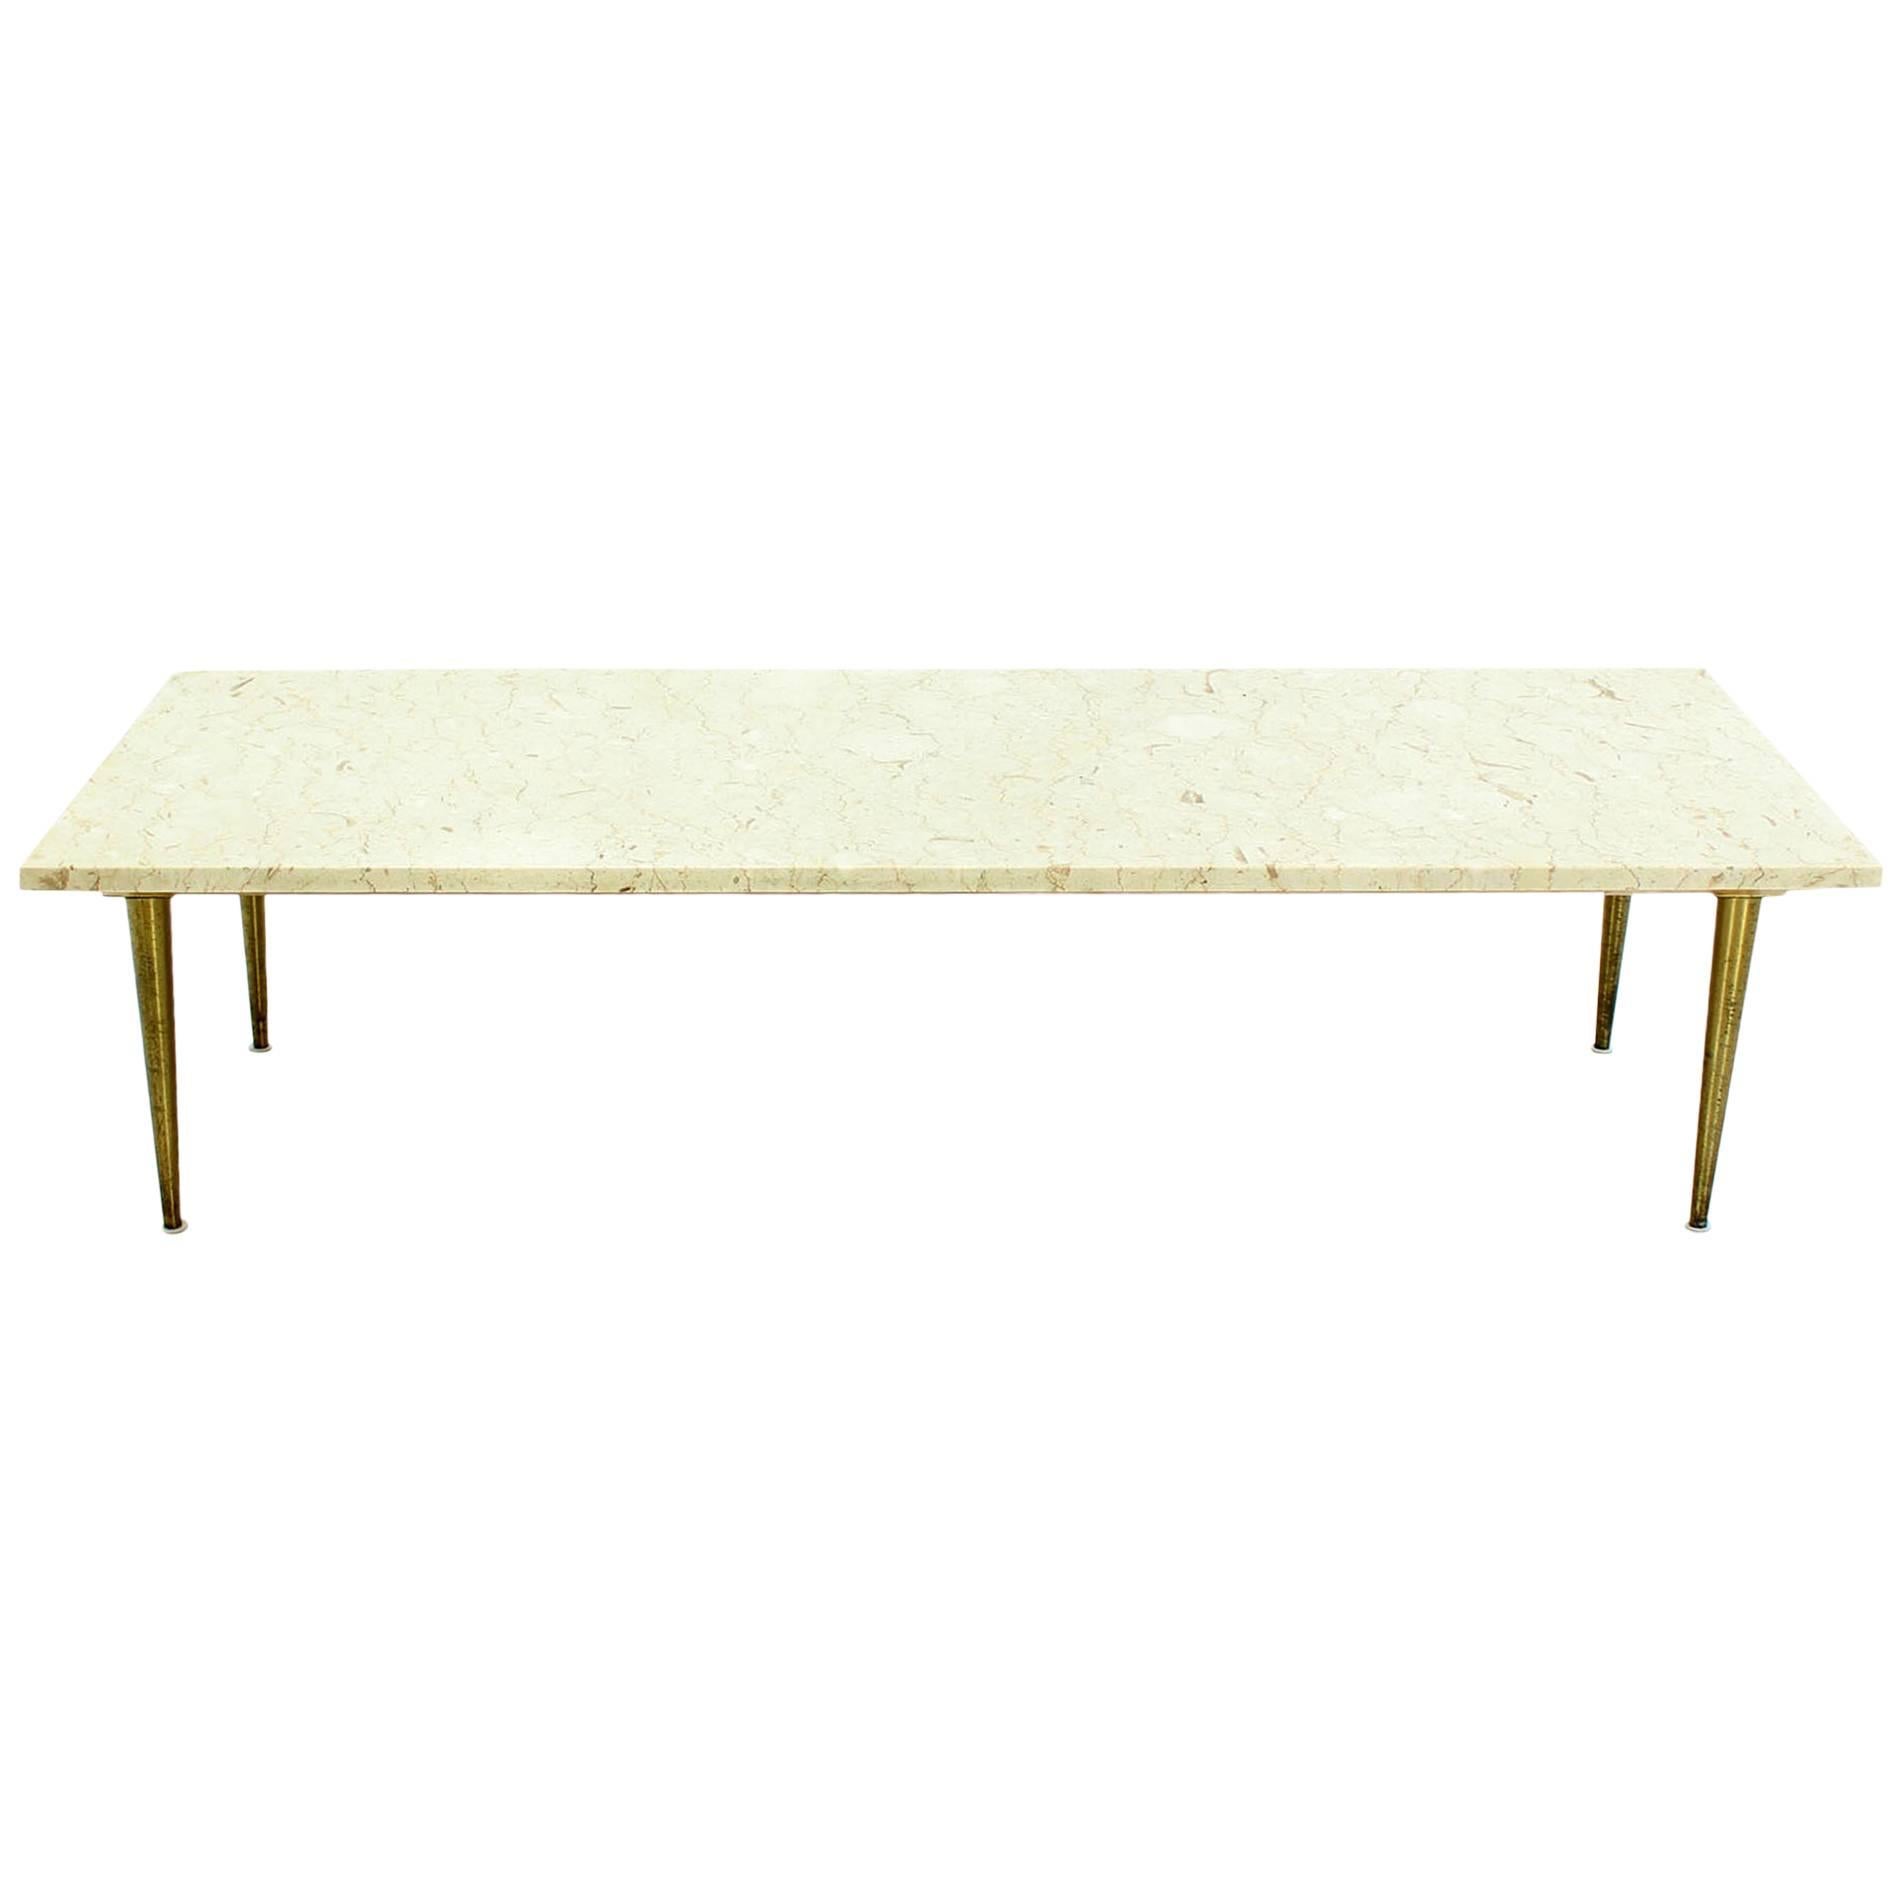 Clean Lines Mid Century Modern Design Table w/ Marble Top.